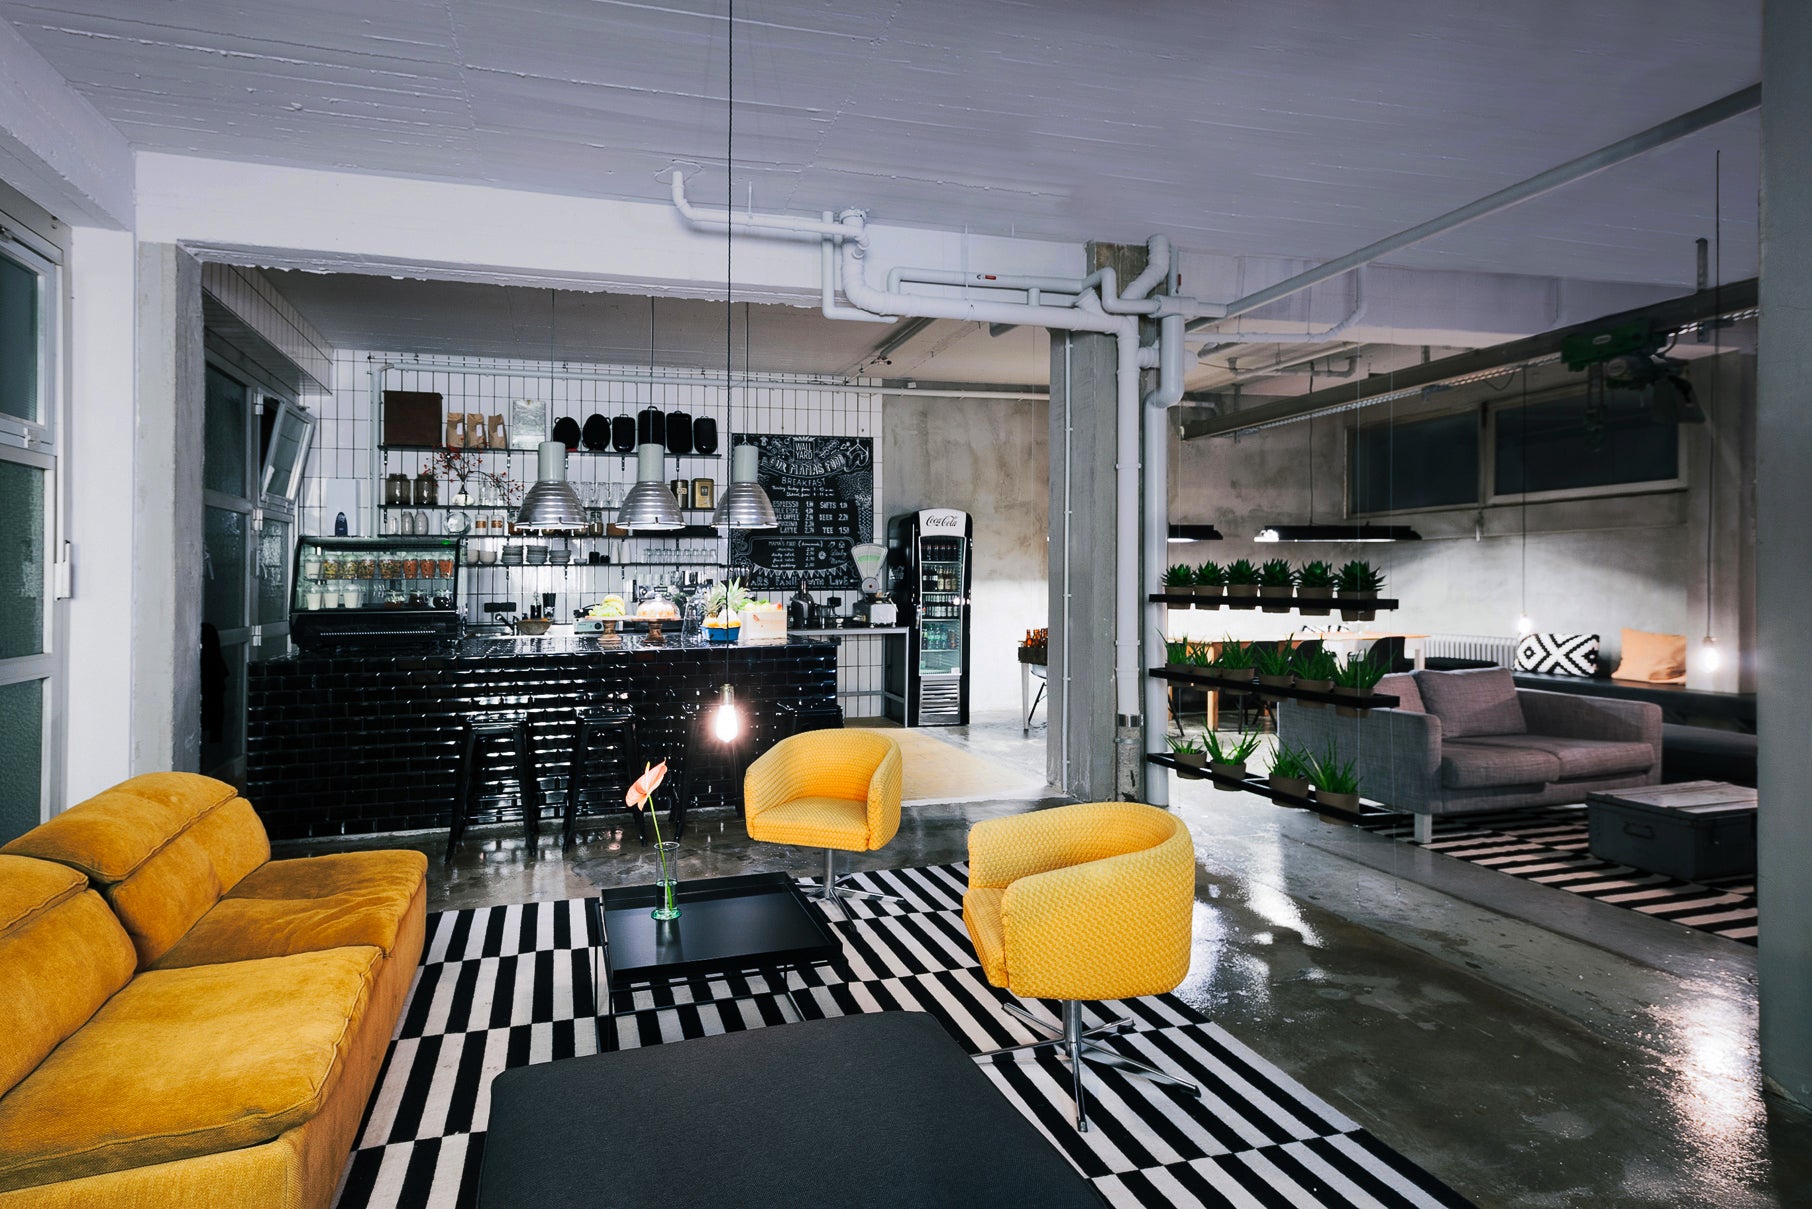 Sip cocktails in the Wallyard's lobby and bar